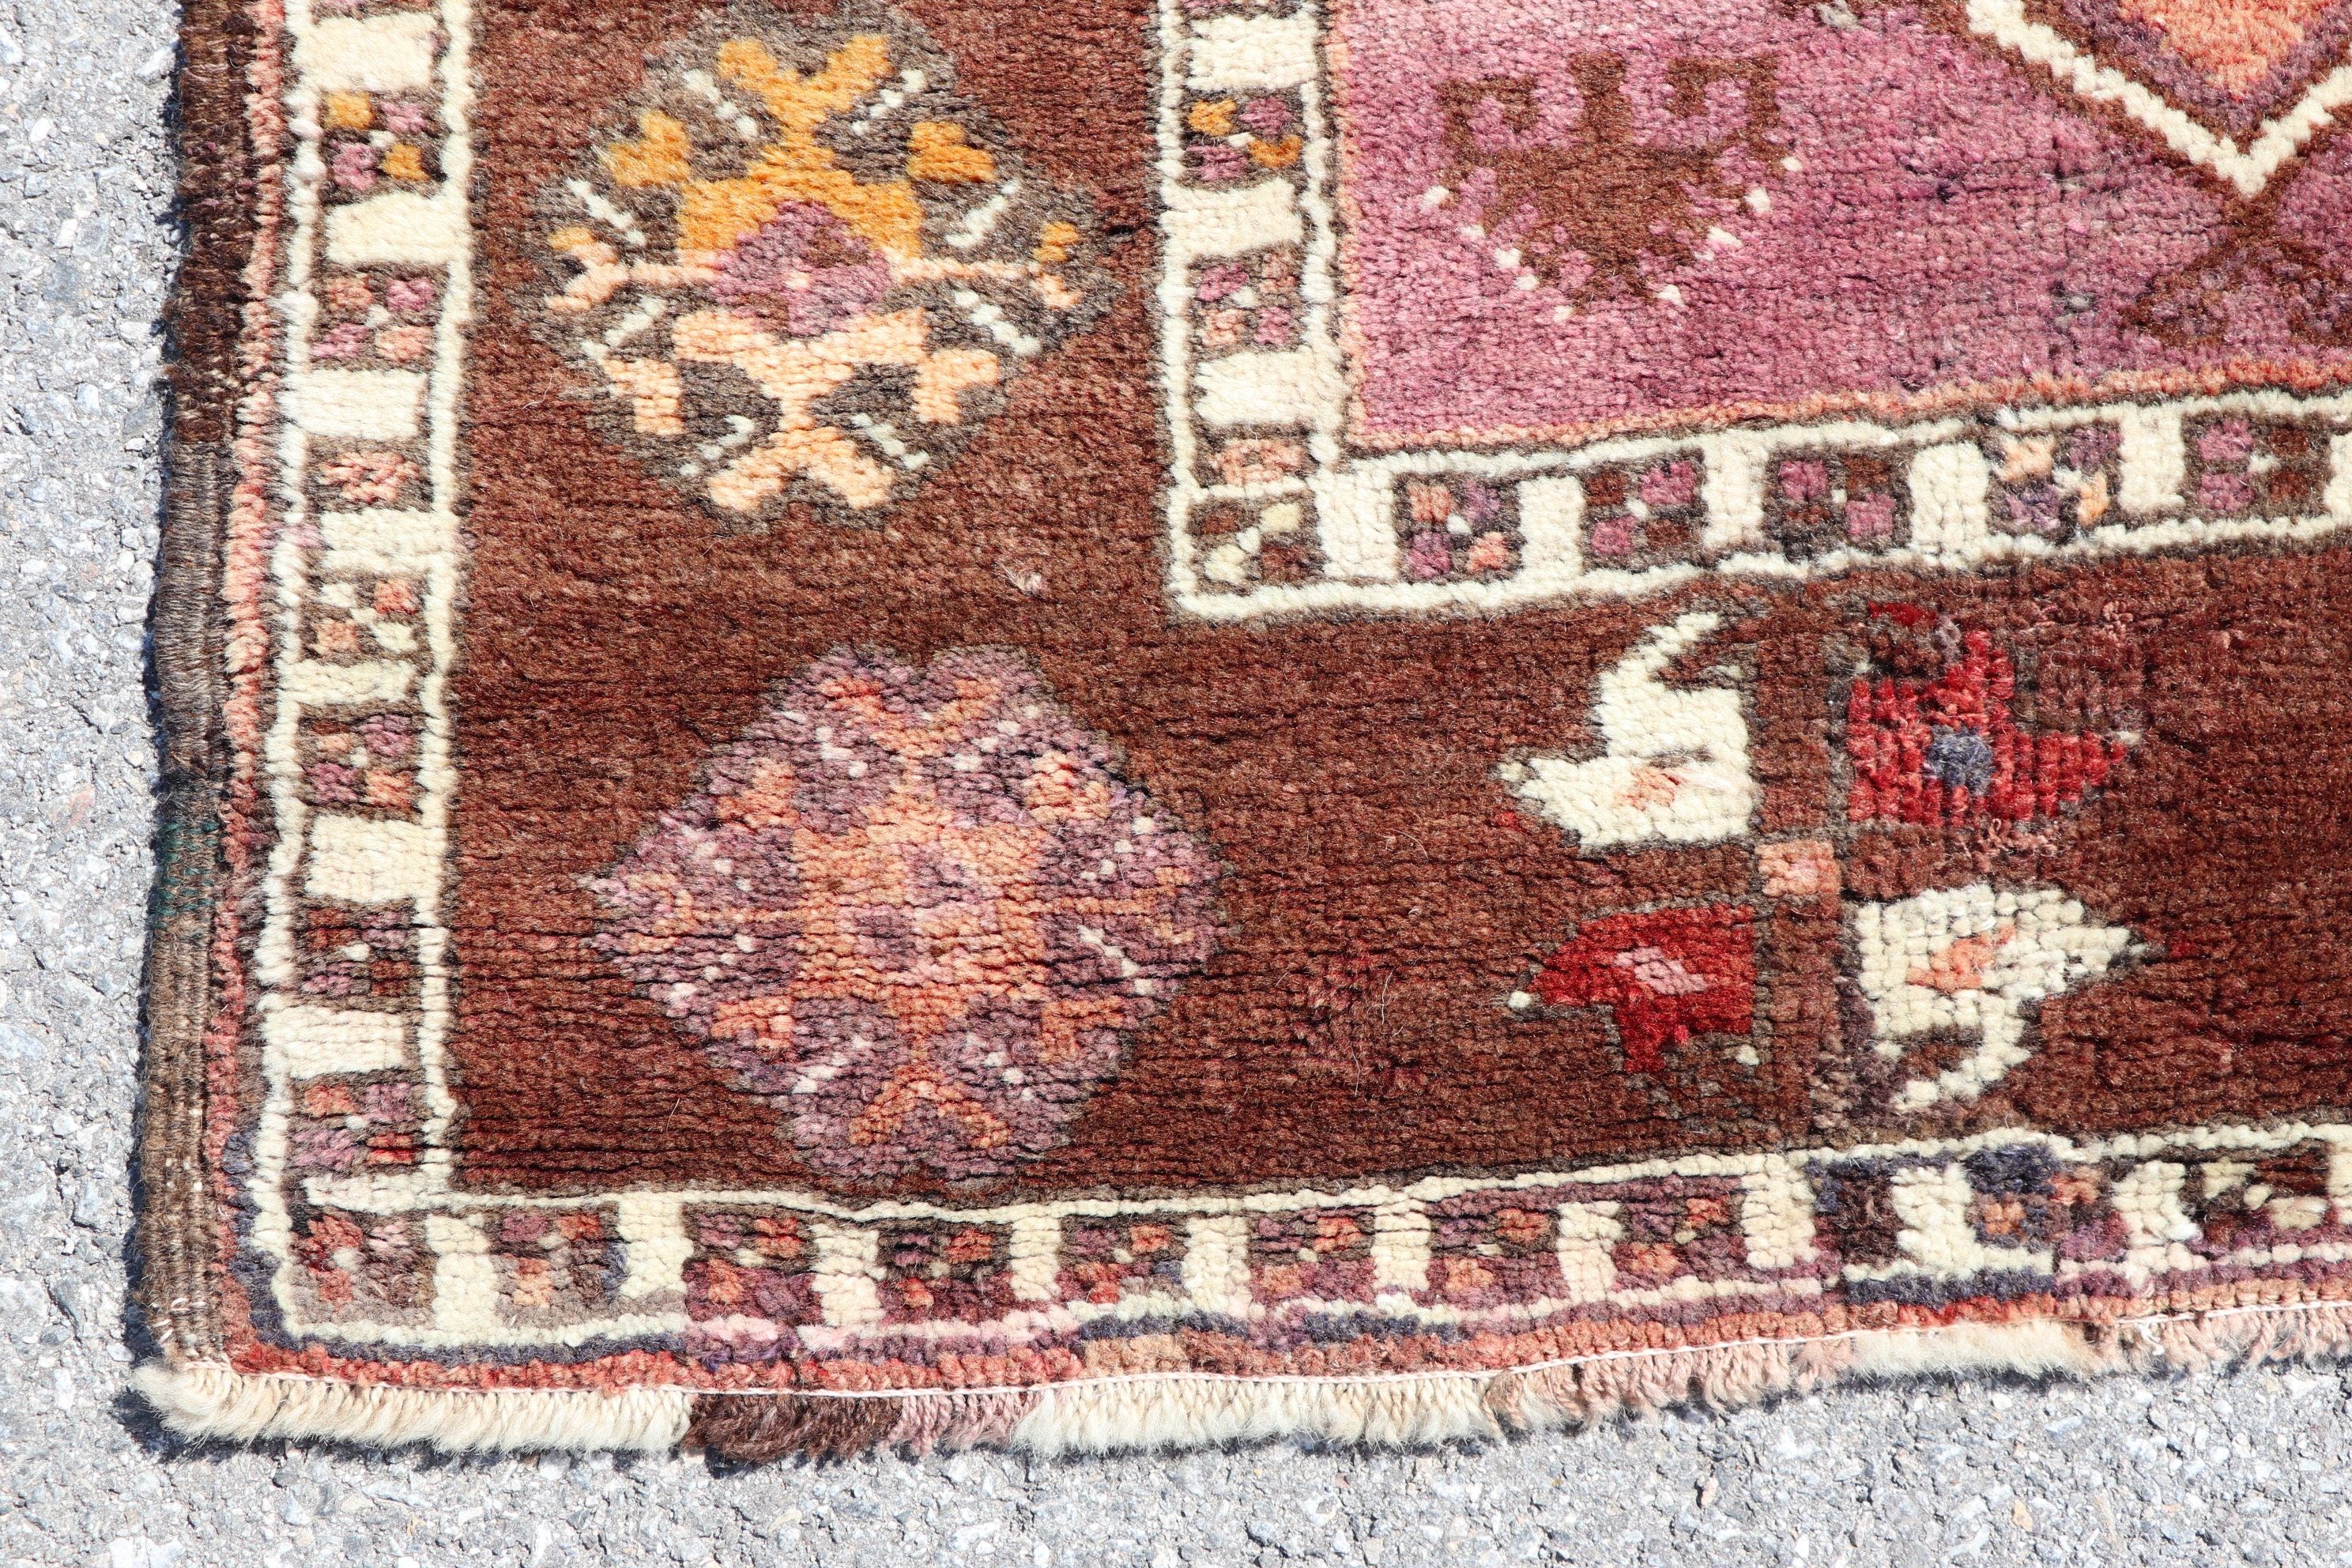 Turkish Rug, Kitchen Rug, Moroccan Rug, Cute Rug, Entry Rug, Anatolian Rugs, Vintage Rug, Brown Oriental Rugs, 3.4x5.3 ft Accent Rugs